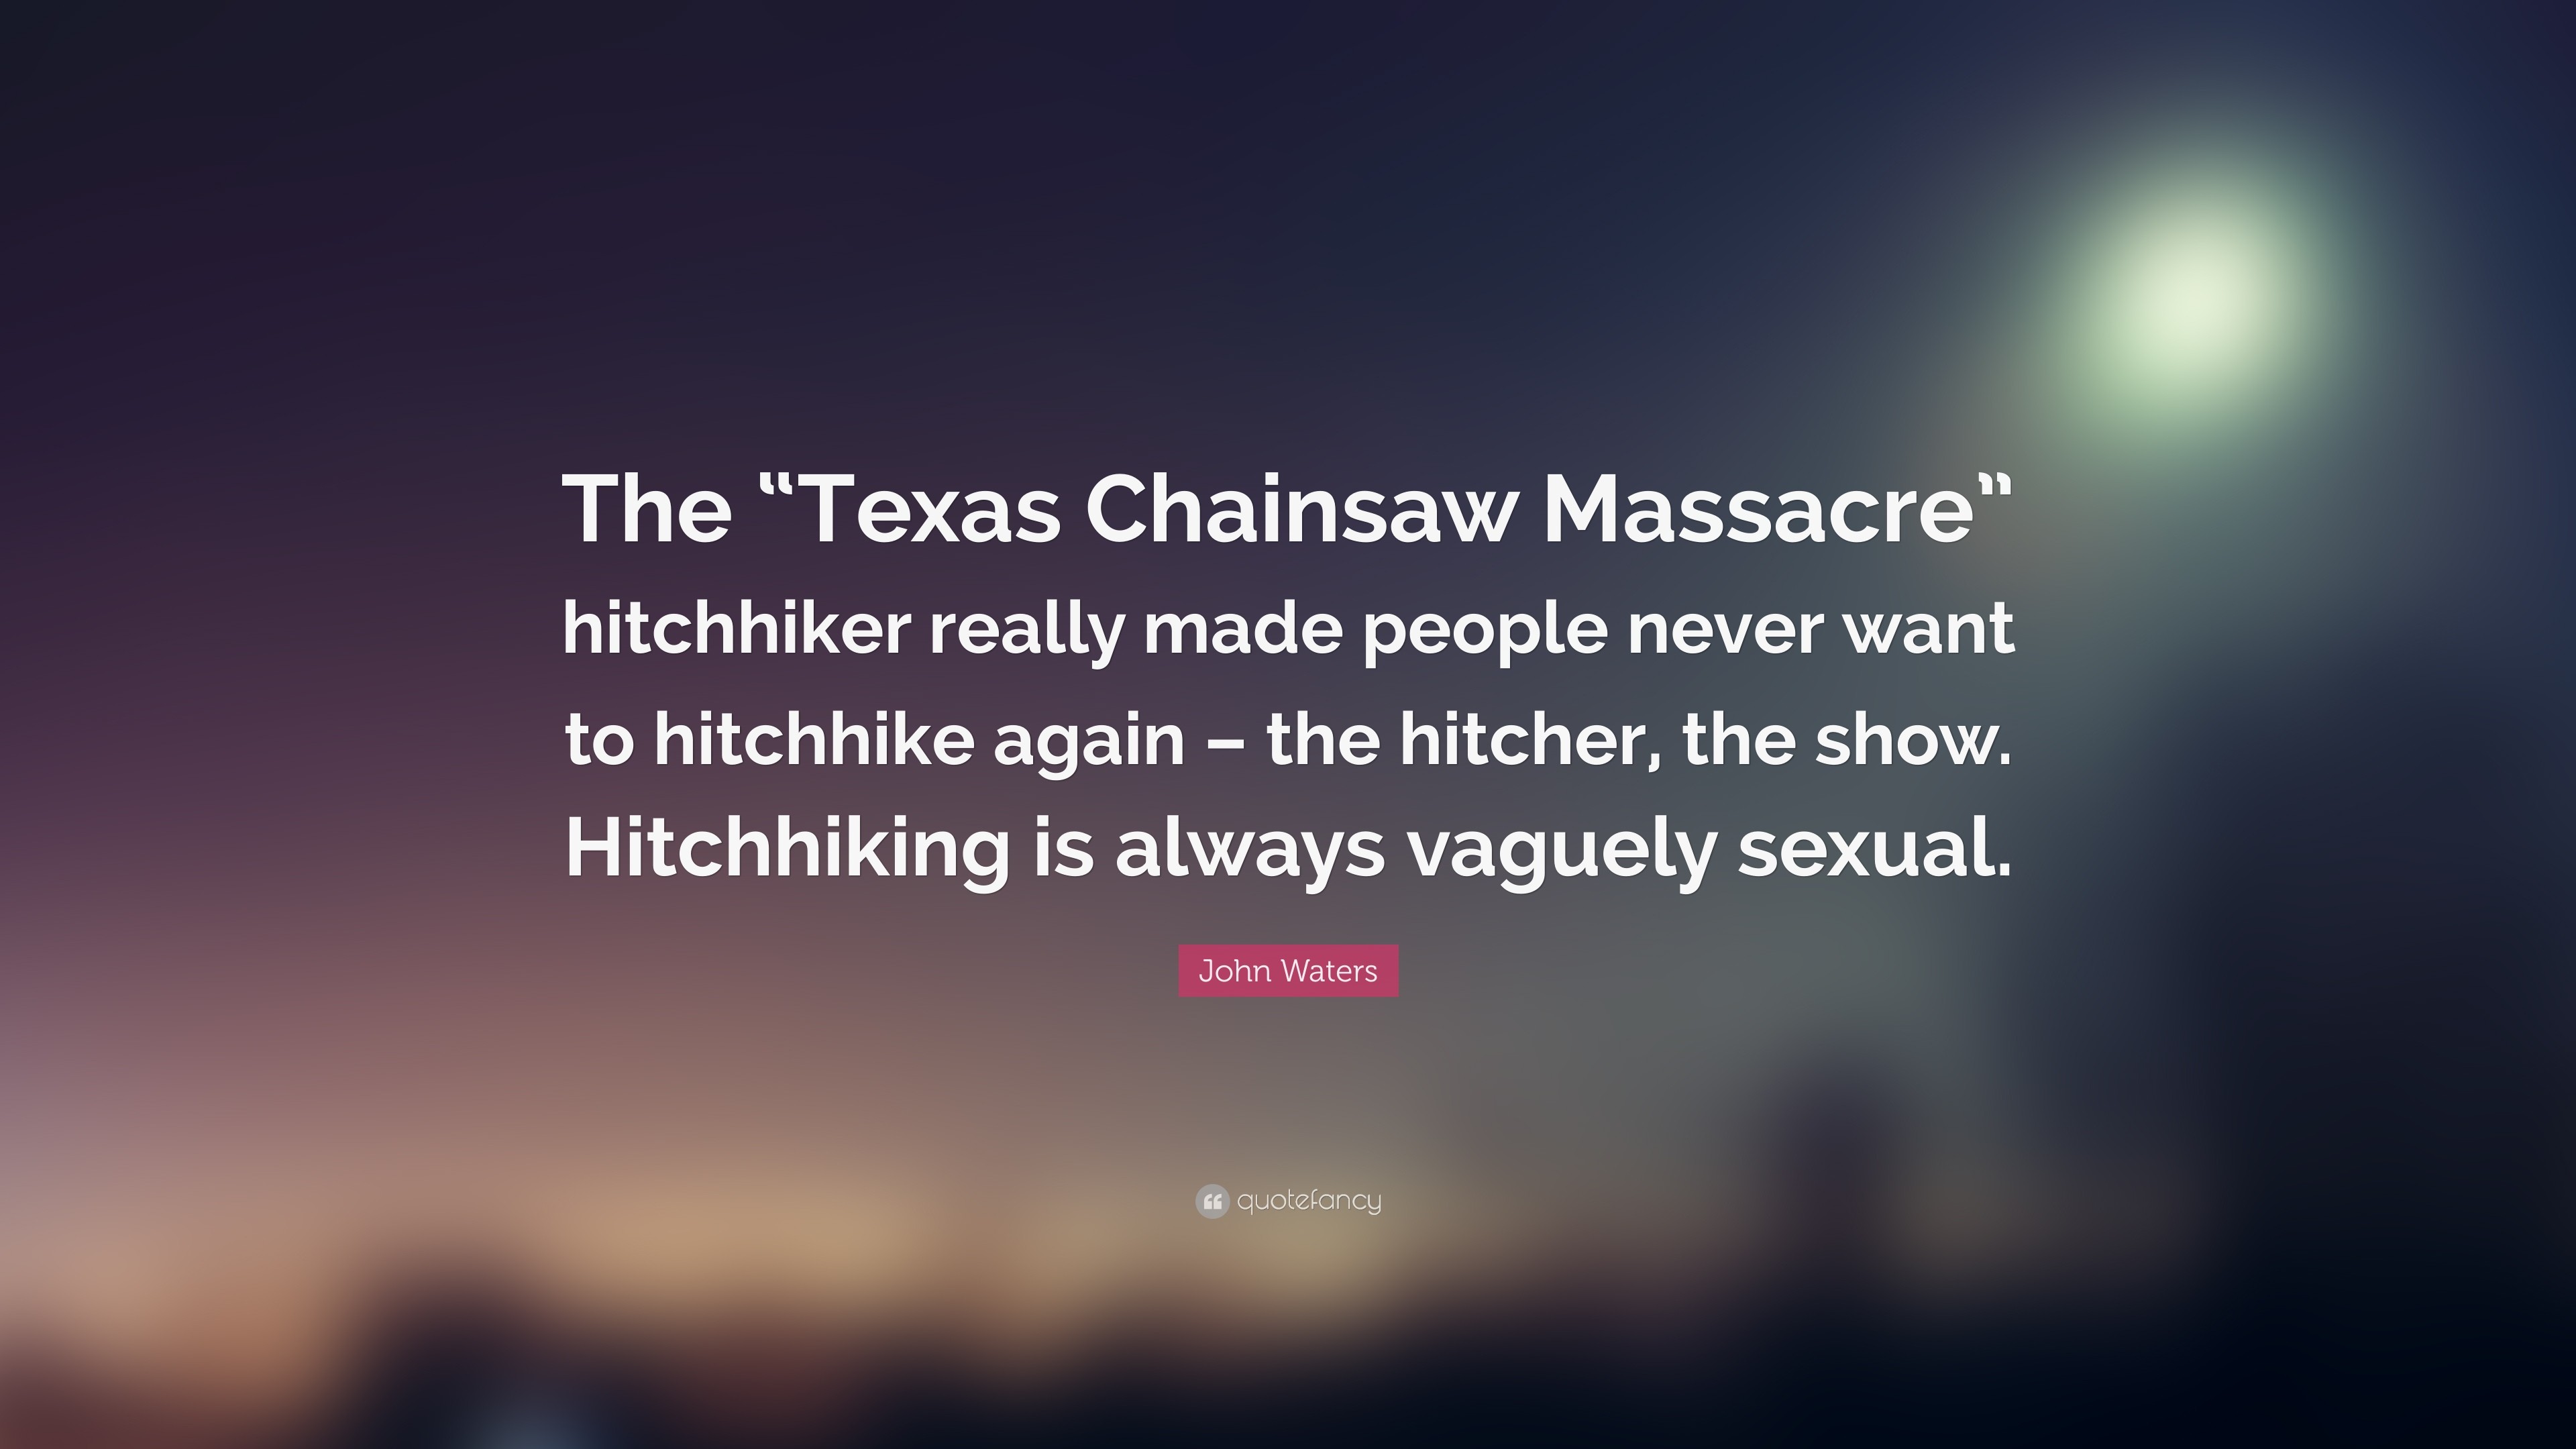 3840x2160 John Waters Quote: “The “Texas Chainsaw Massacre” hitchhiker really made  people never